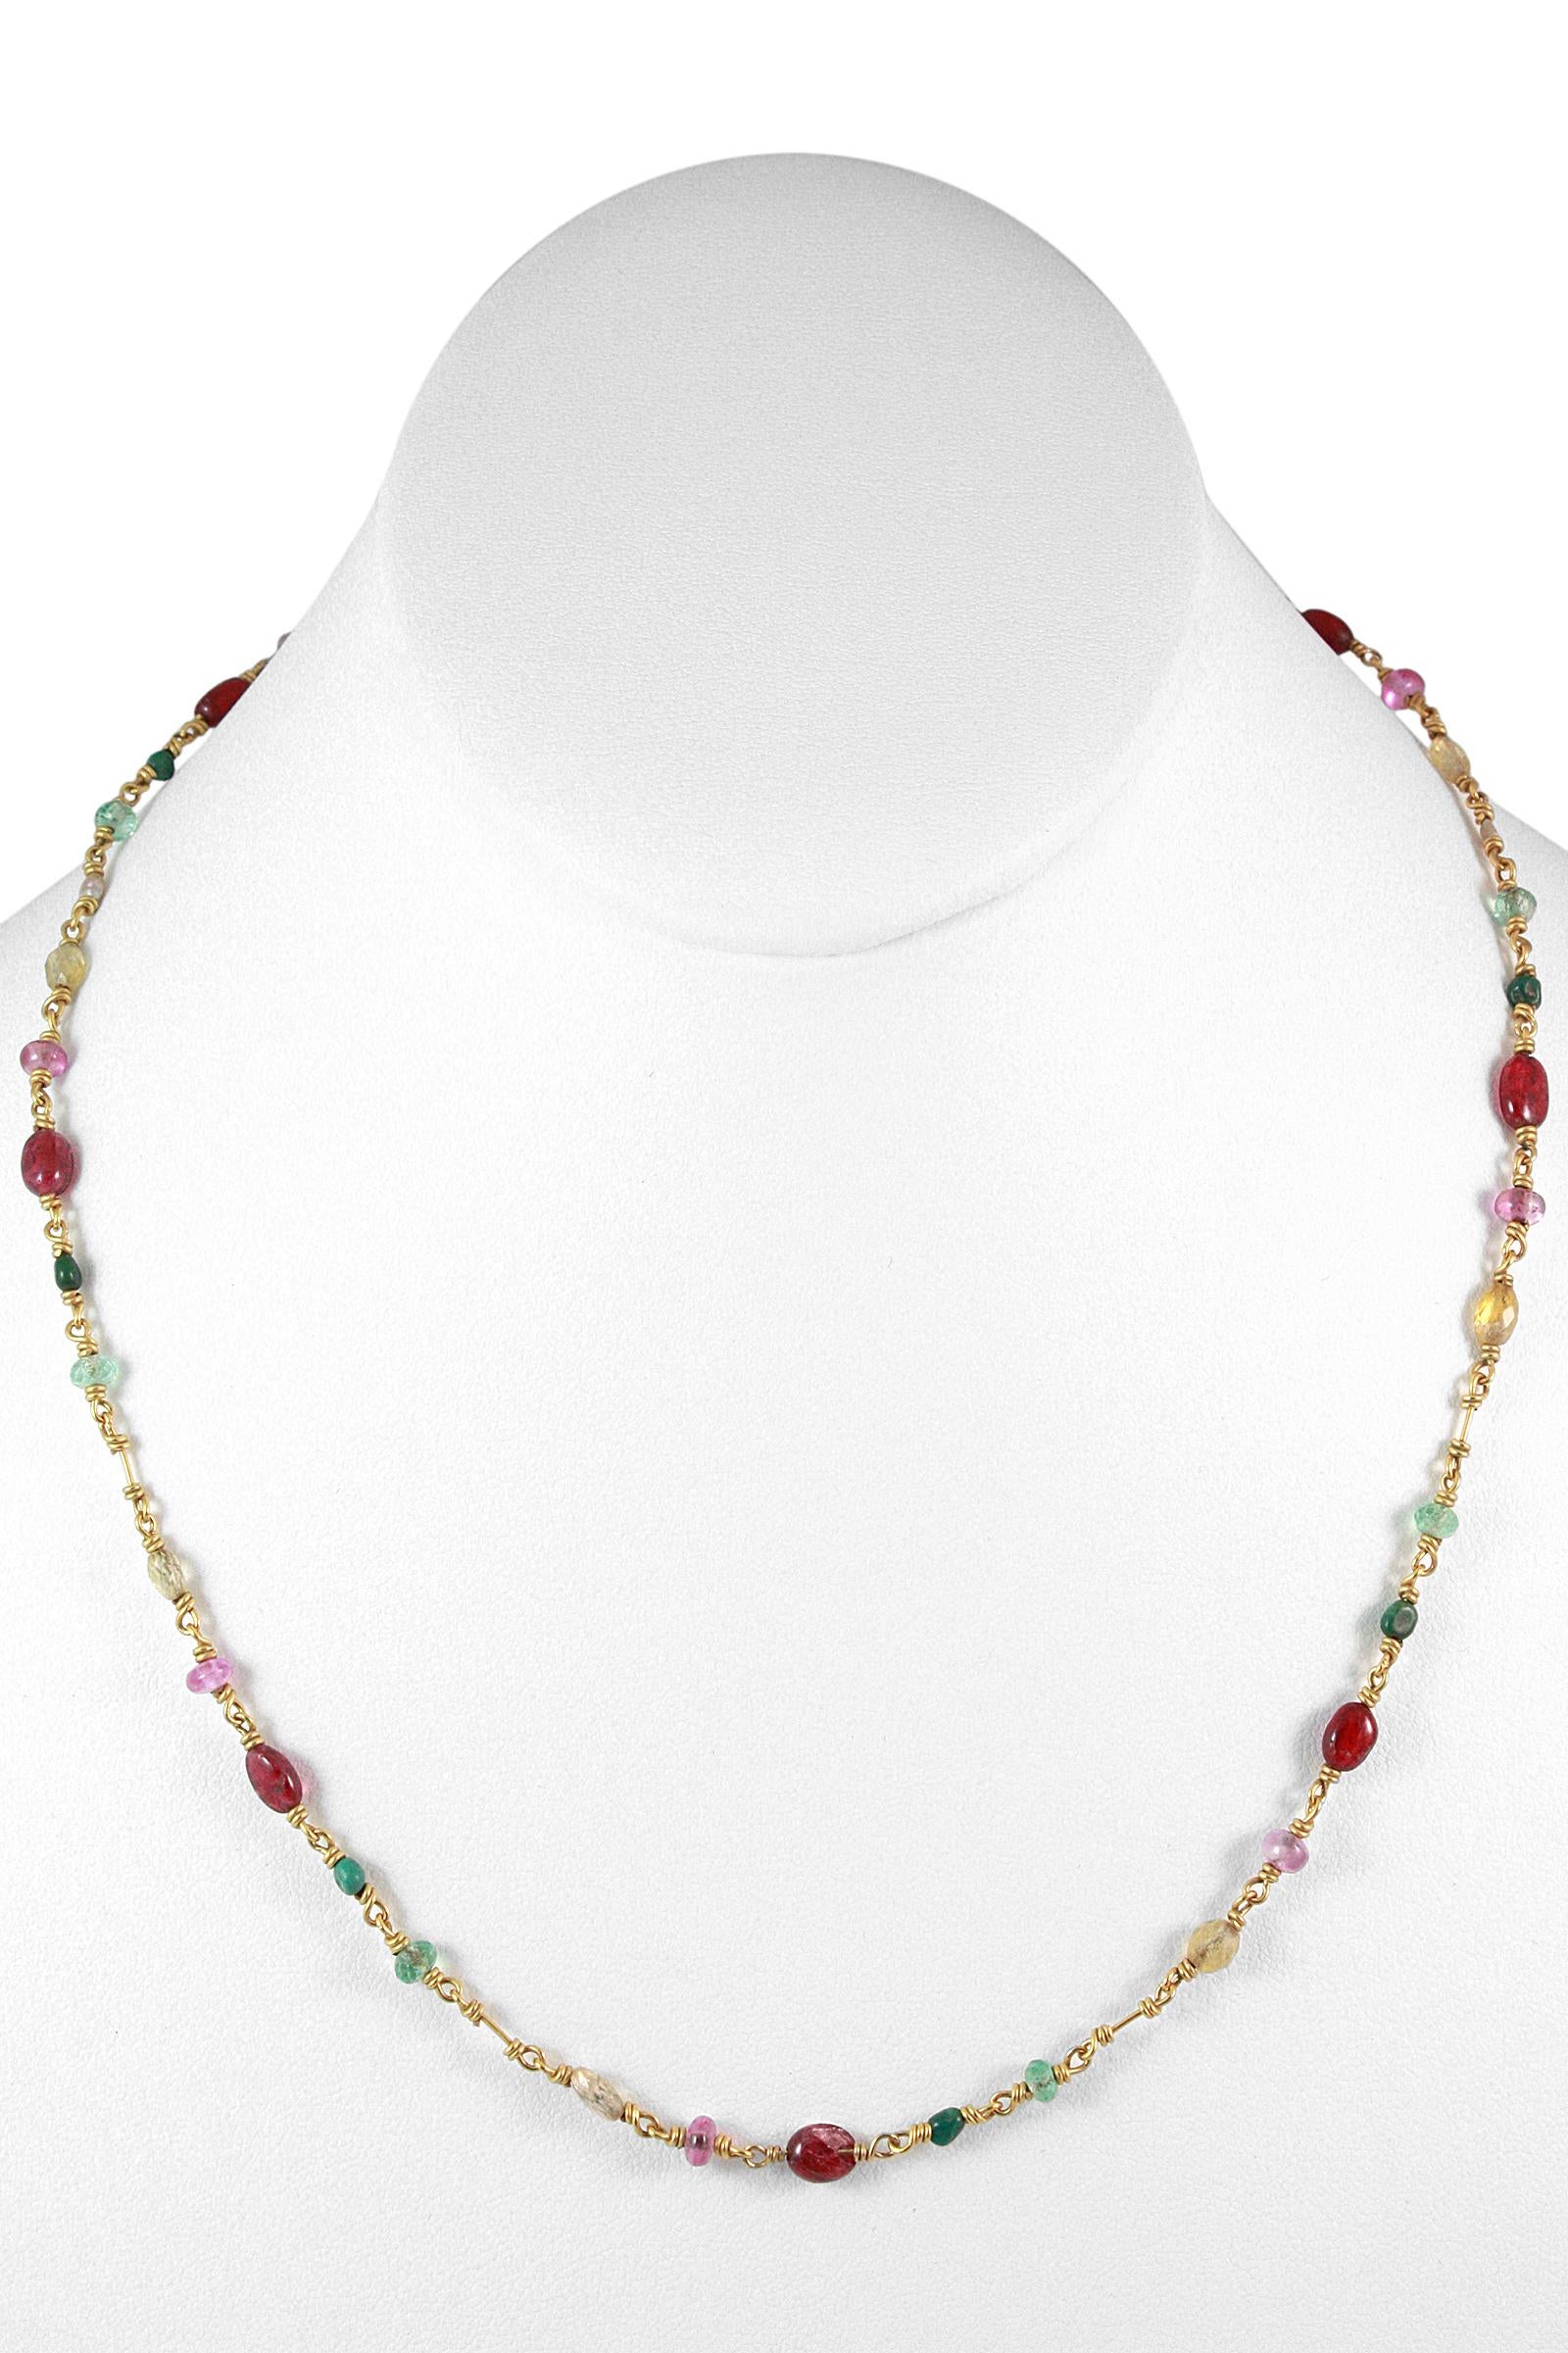 'Isabella' Necklace by Reinstein Ross 
20K Gold with Ruby and Emerald cabochons, seed pearls, as well as faceted pink, green and yellow Tourmalines. 
Signature curved hook closure. 
20